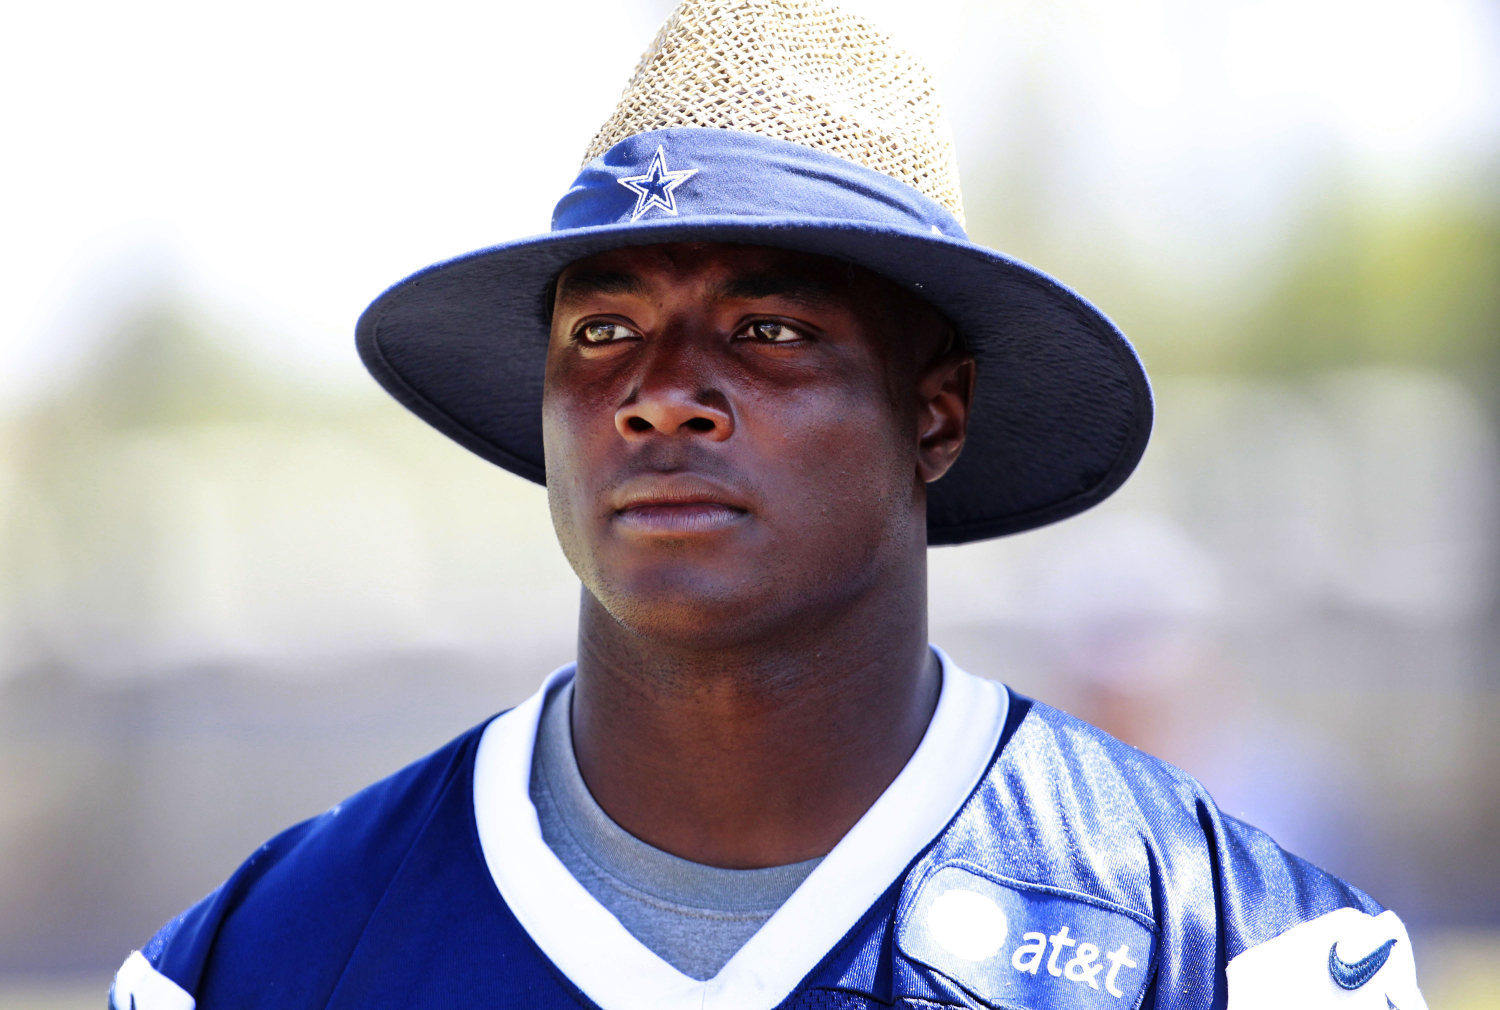 DeMarcus Ware had a great career with the Dallas Cowboys. However, he just sent out a stern message about the 2020 team and Mike McCarthy.